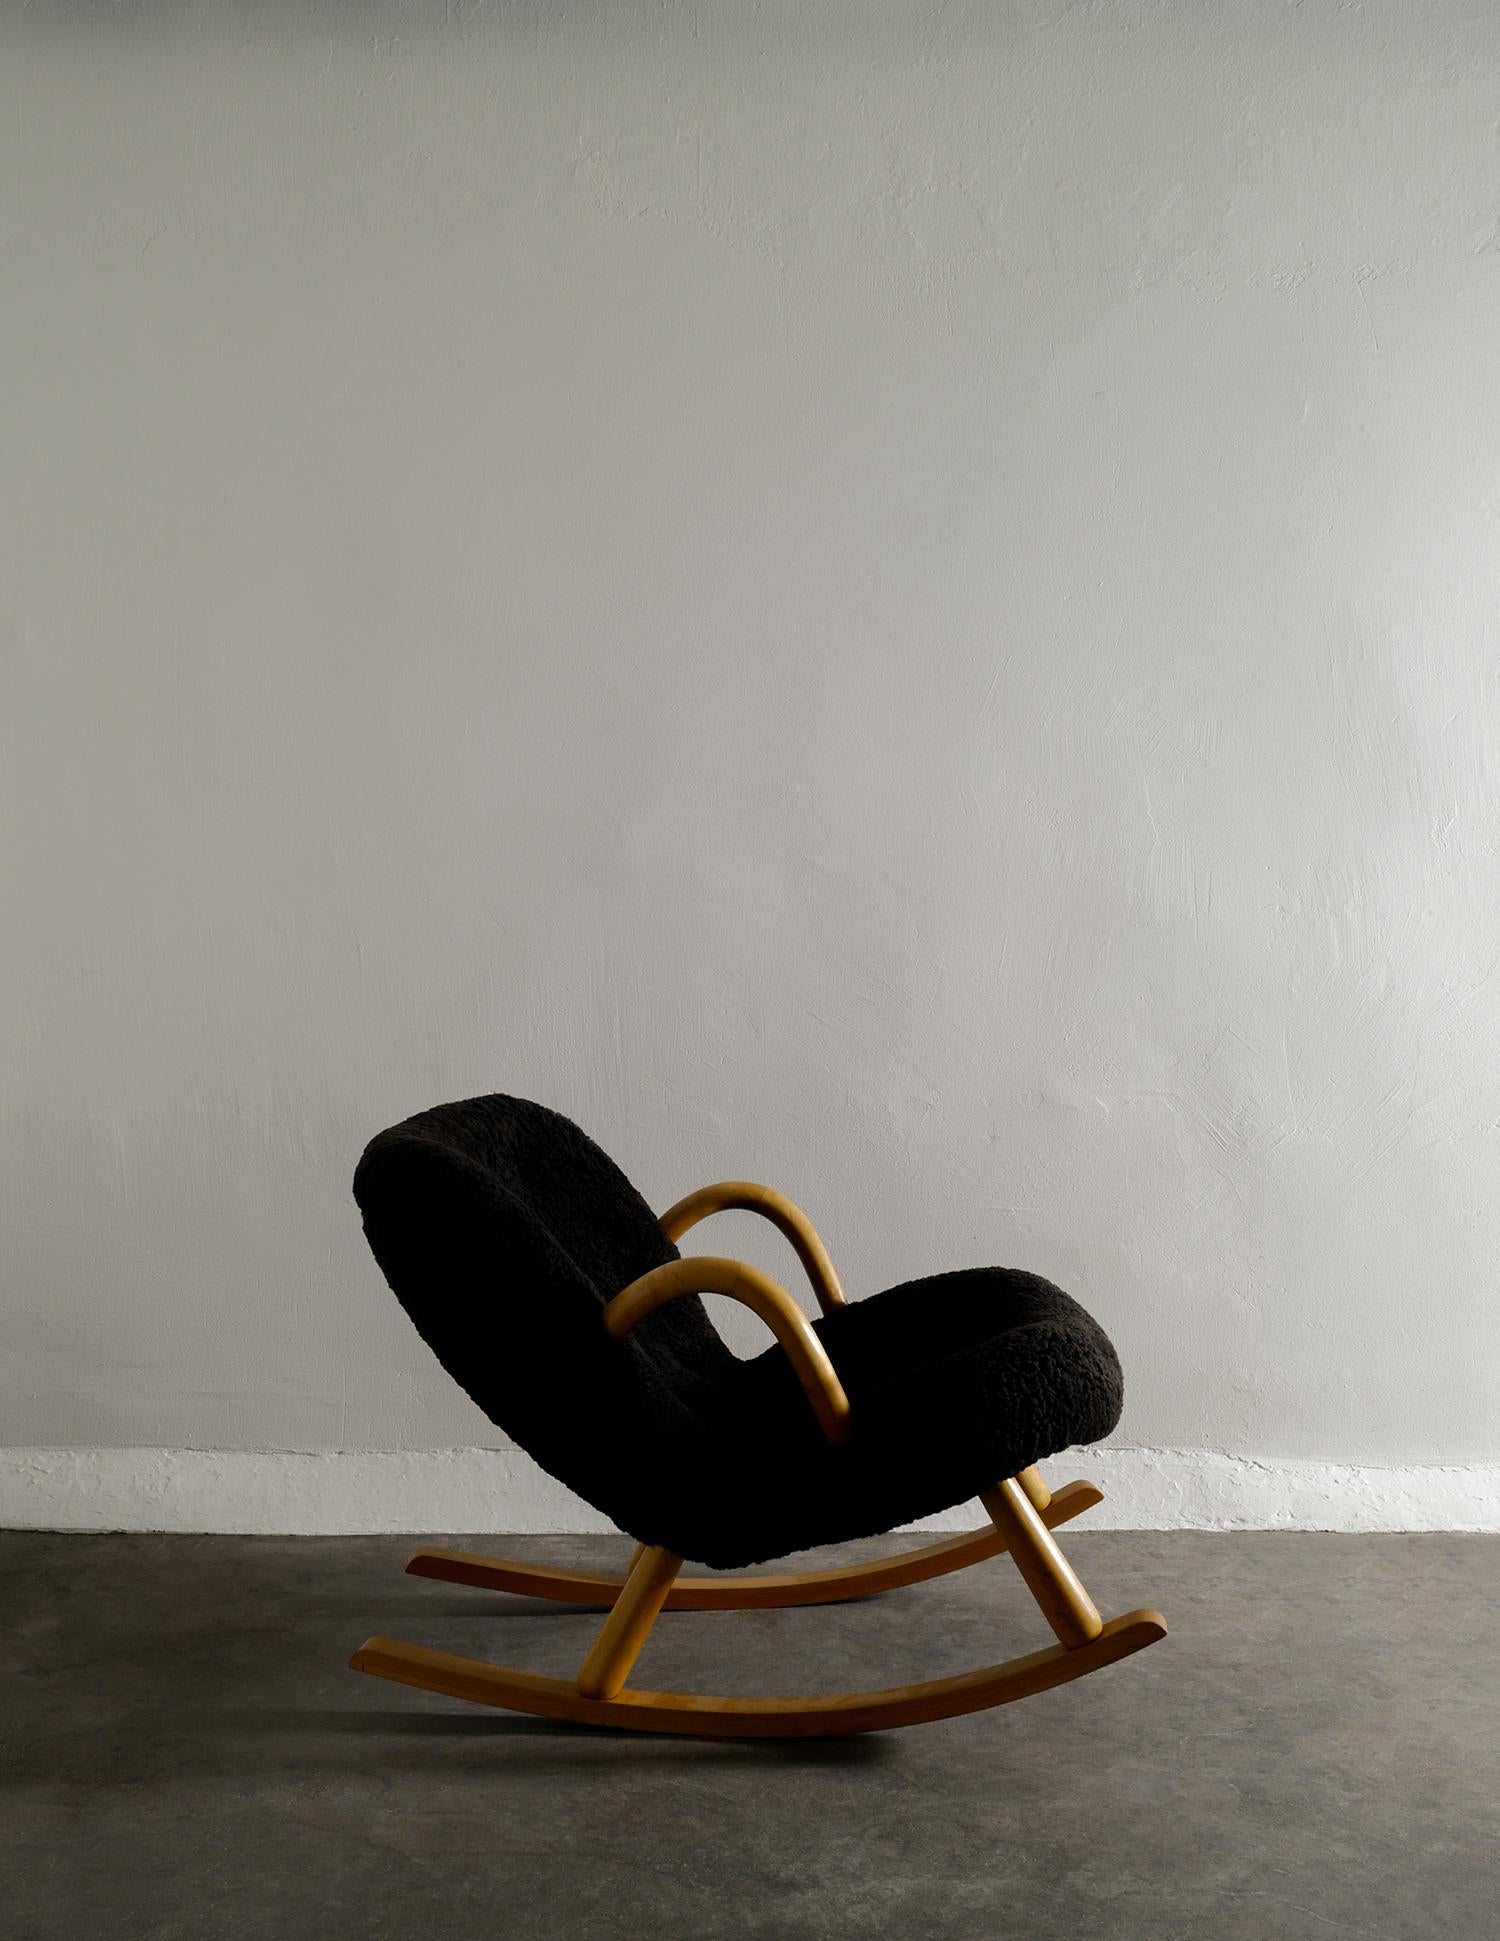 Very rare Scandinavian modern / mid-century rocking clam chair designed by Arnold Madsen and produced by Nordisk Staal / Møbel Central in Denmark during the 1940s. The chair has been professionally restored and upholstered with dark brown sheepskin.